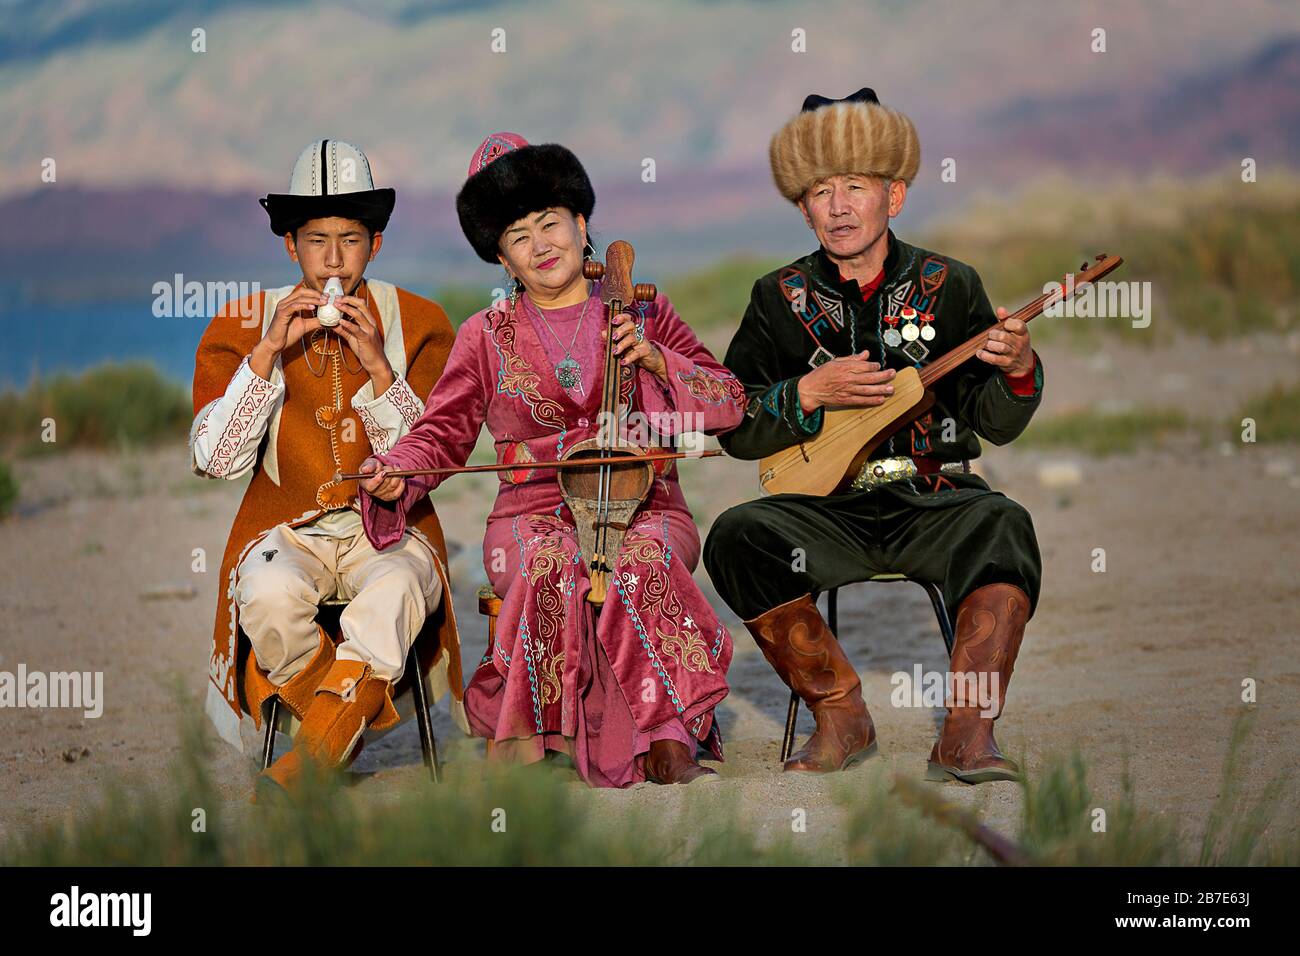 Musicians playing local traditional instruments, in Issyk Kul, Kyrgyzstan Stock Photo